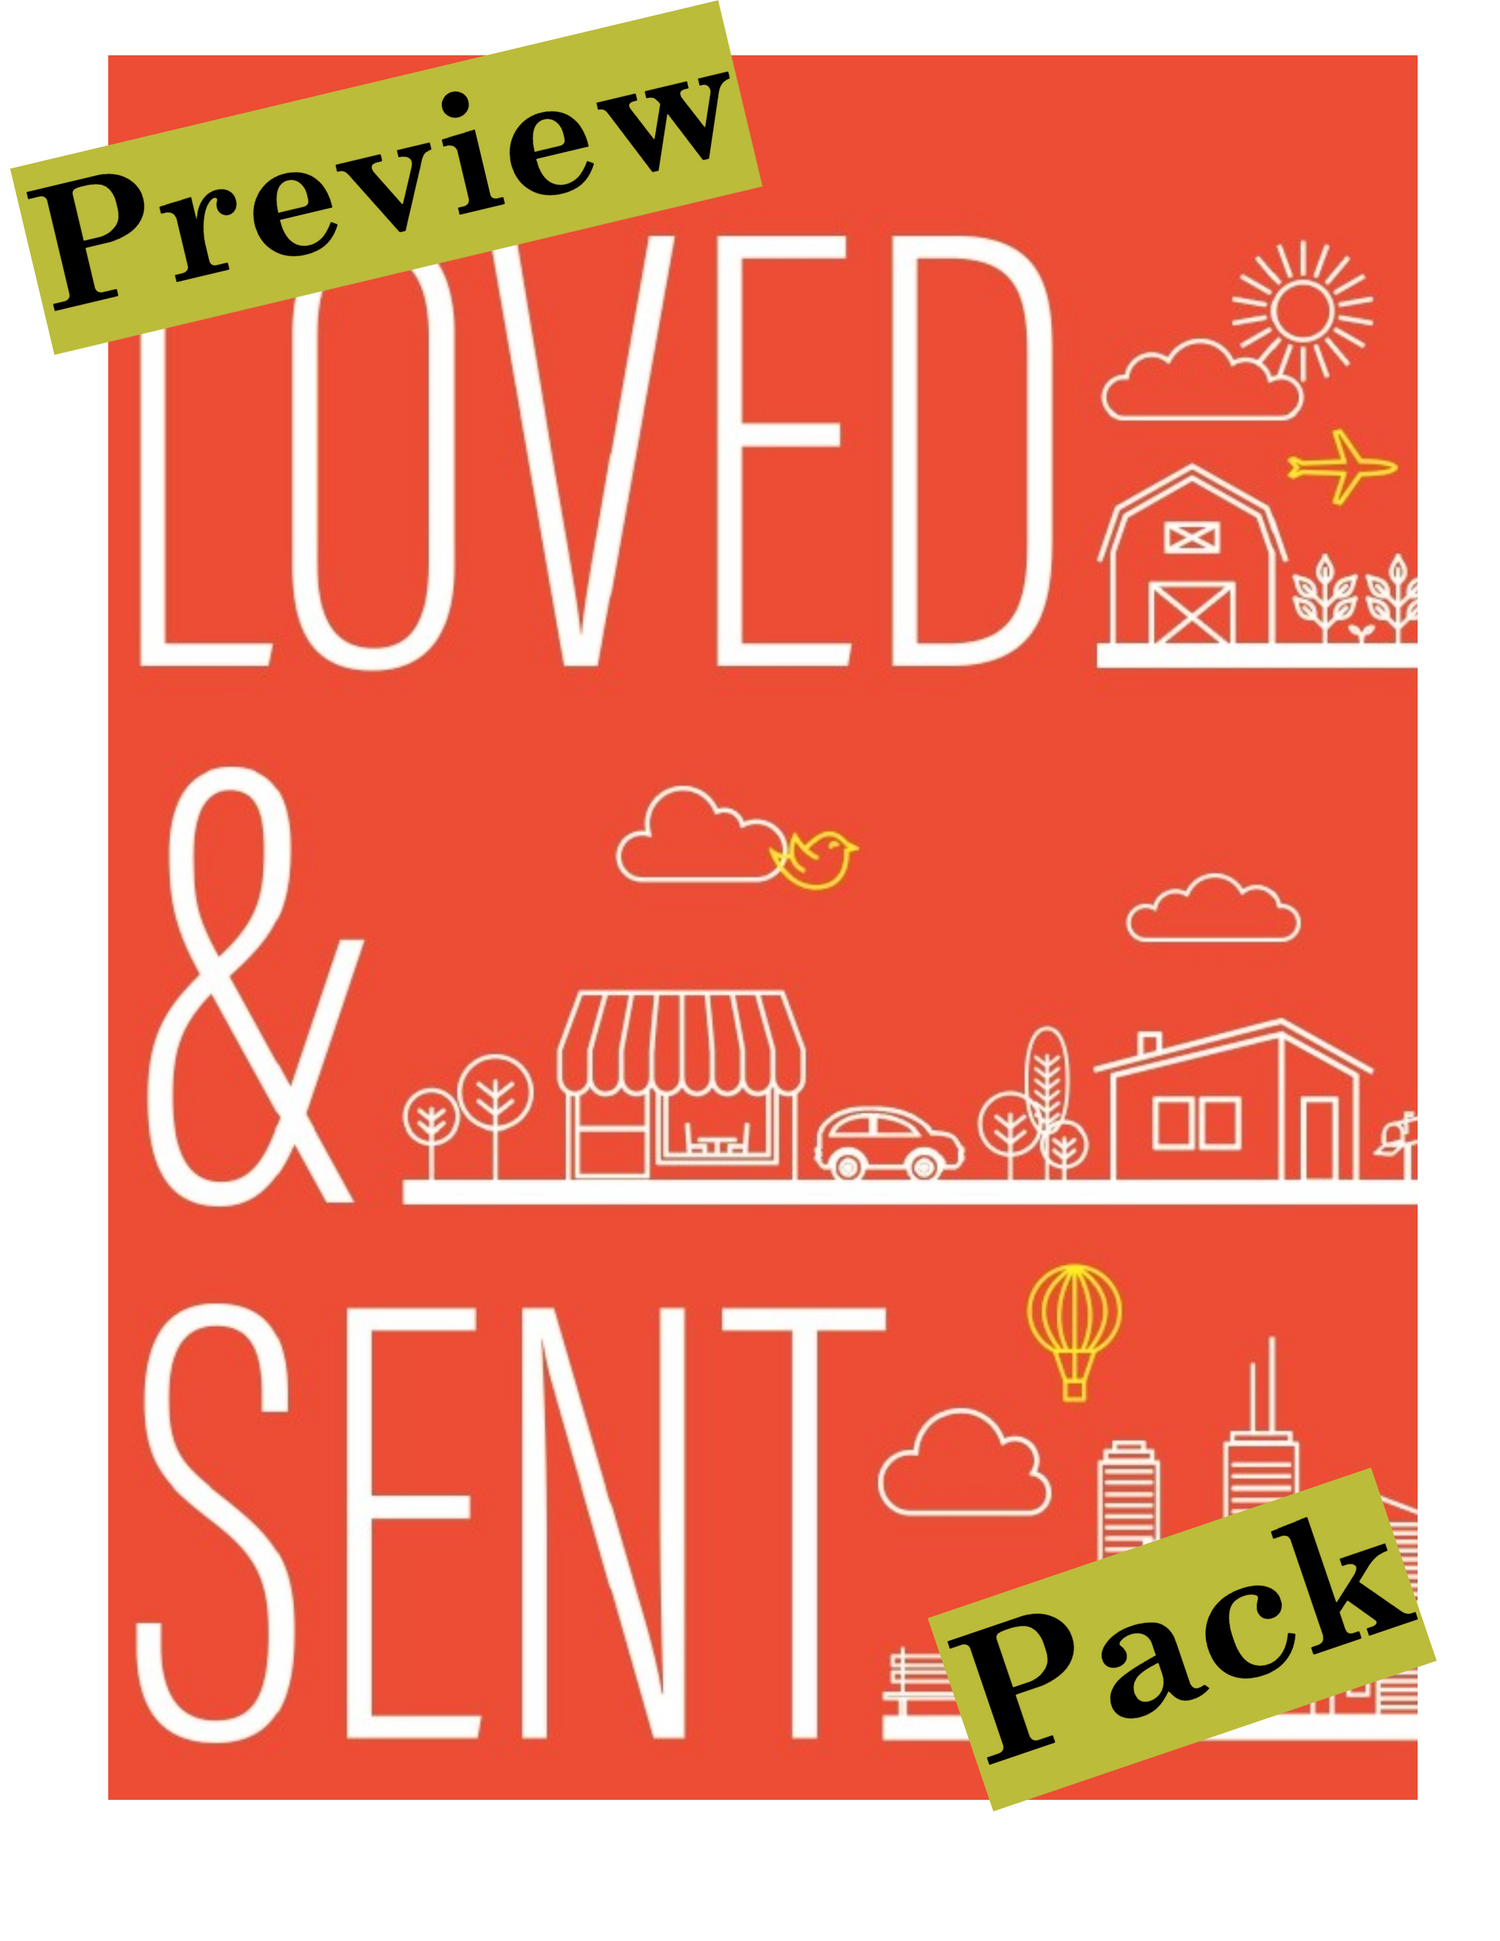 Loved & Sent Preview Pack